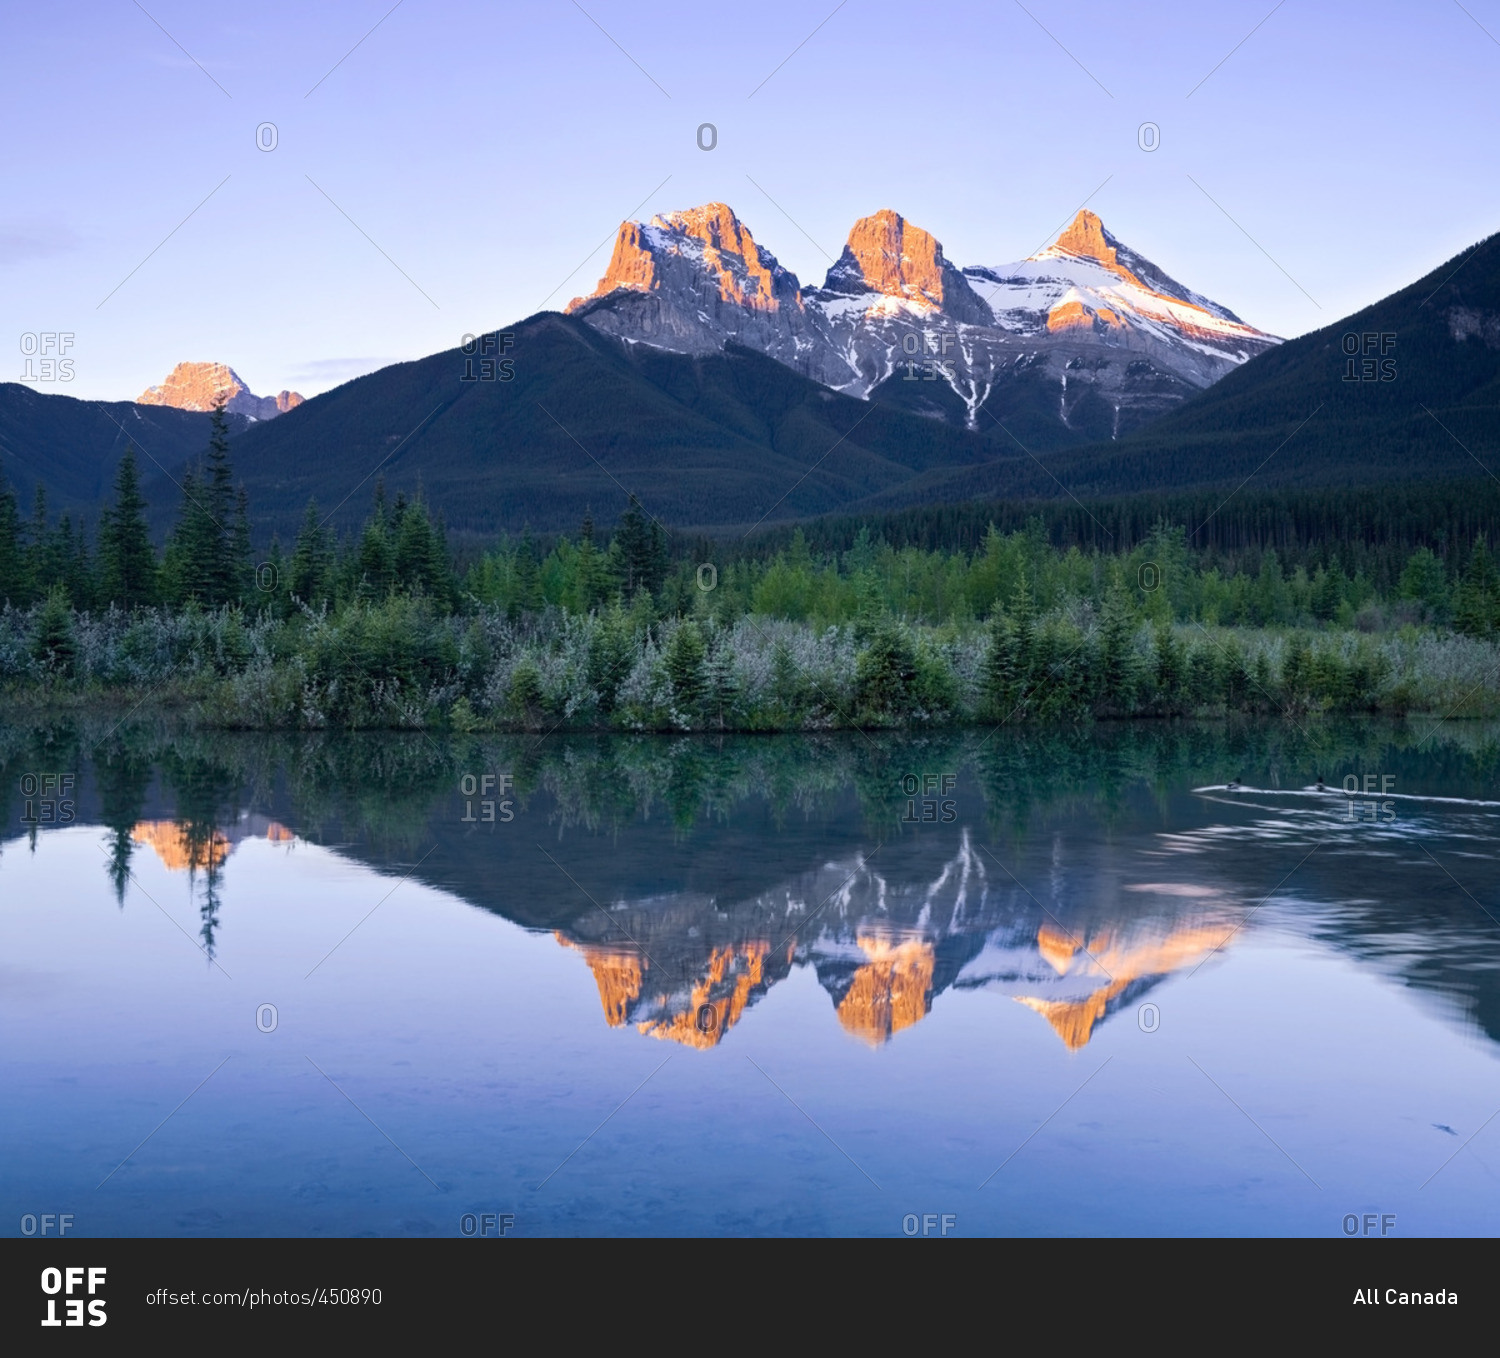 Three Sisters Mountain reflection in water, Canmore, Alberta, Canada